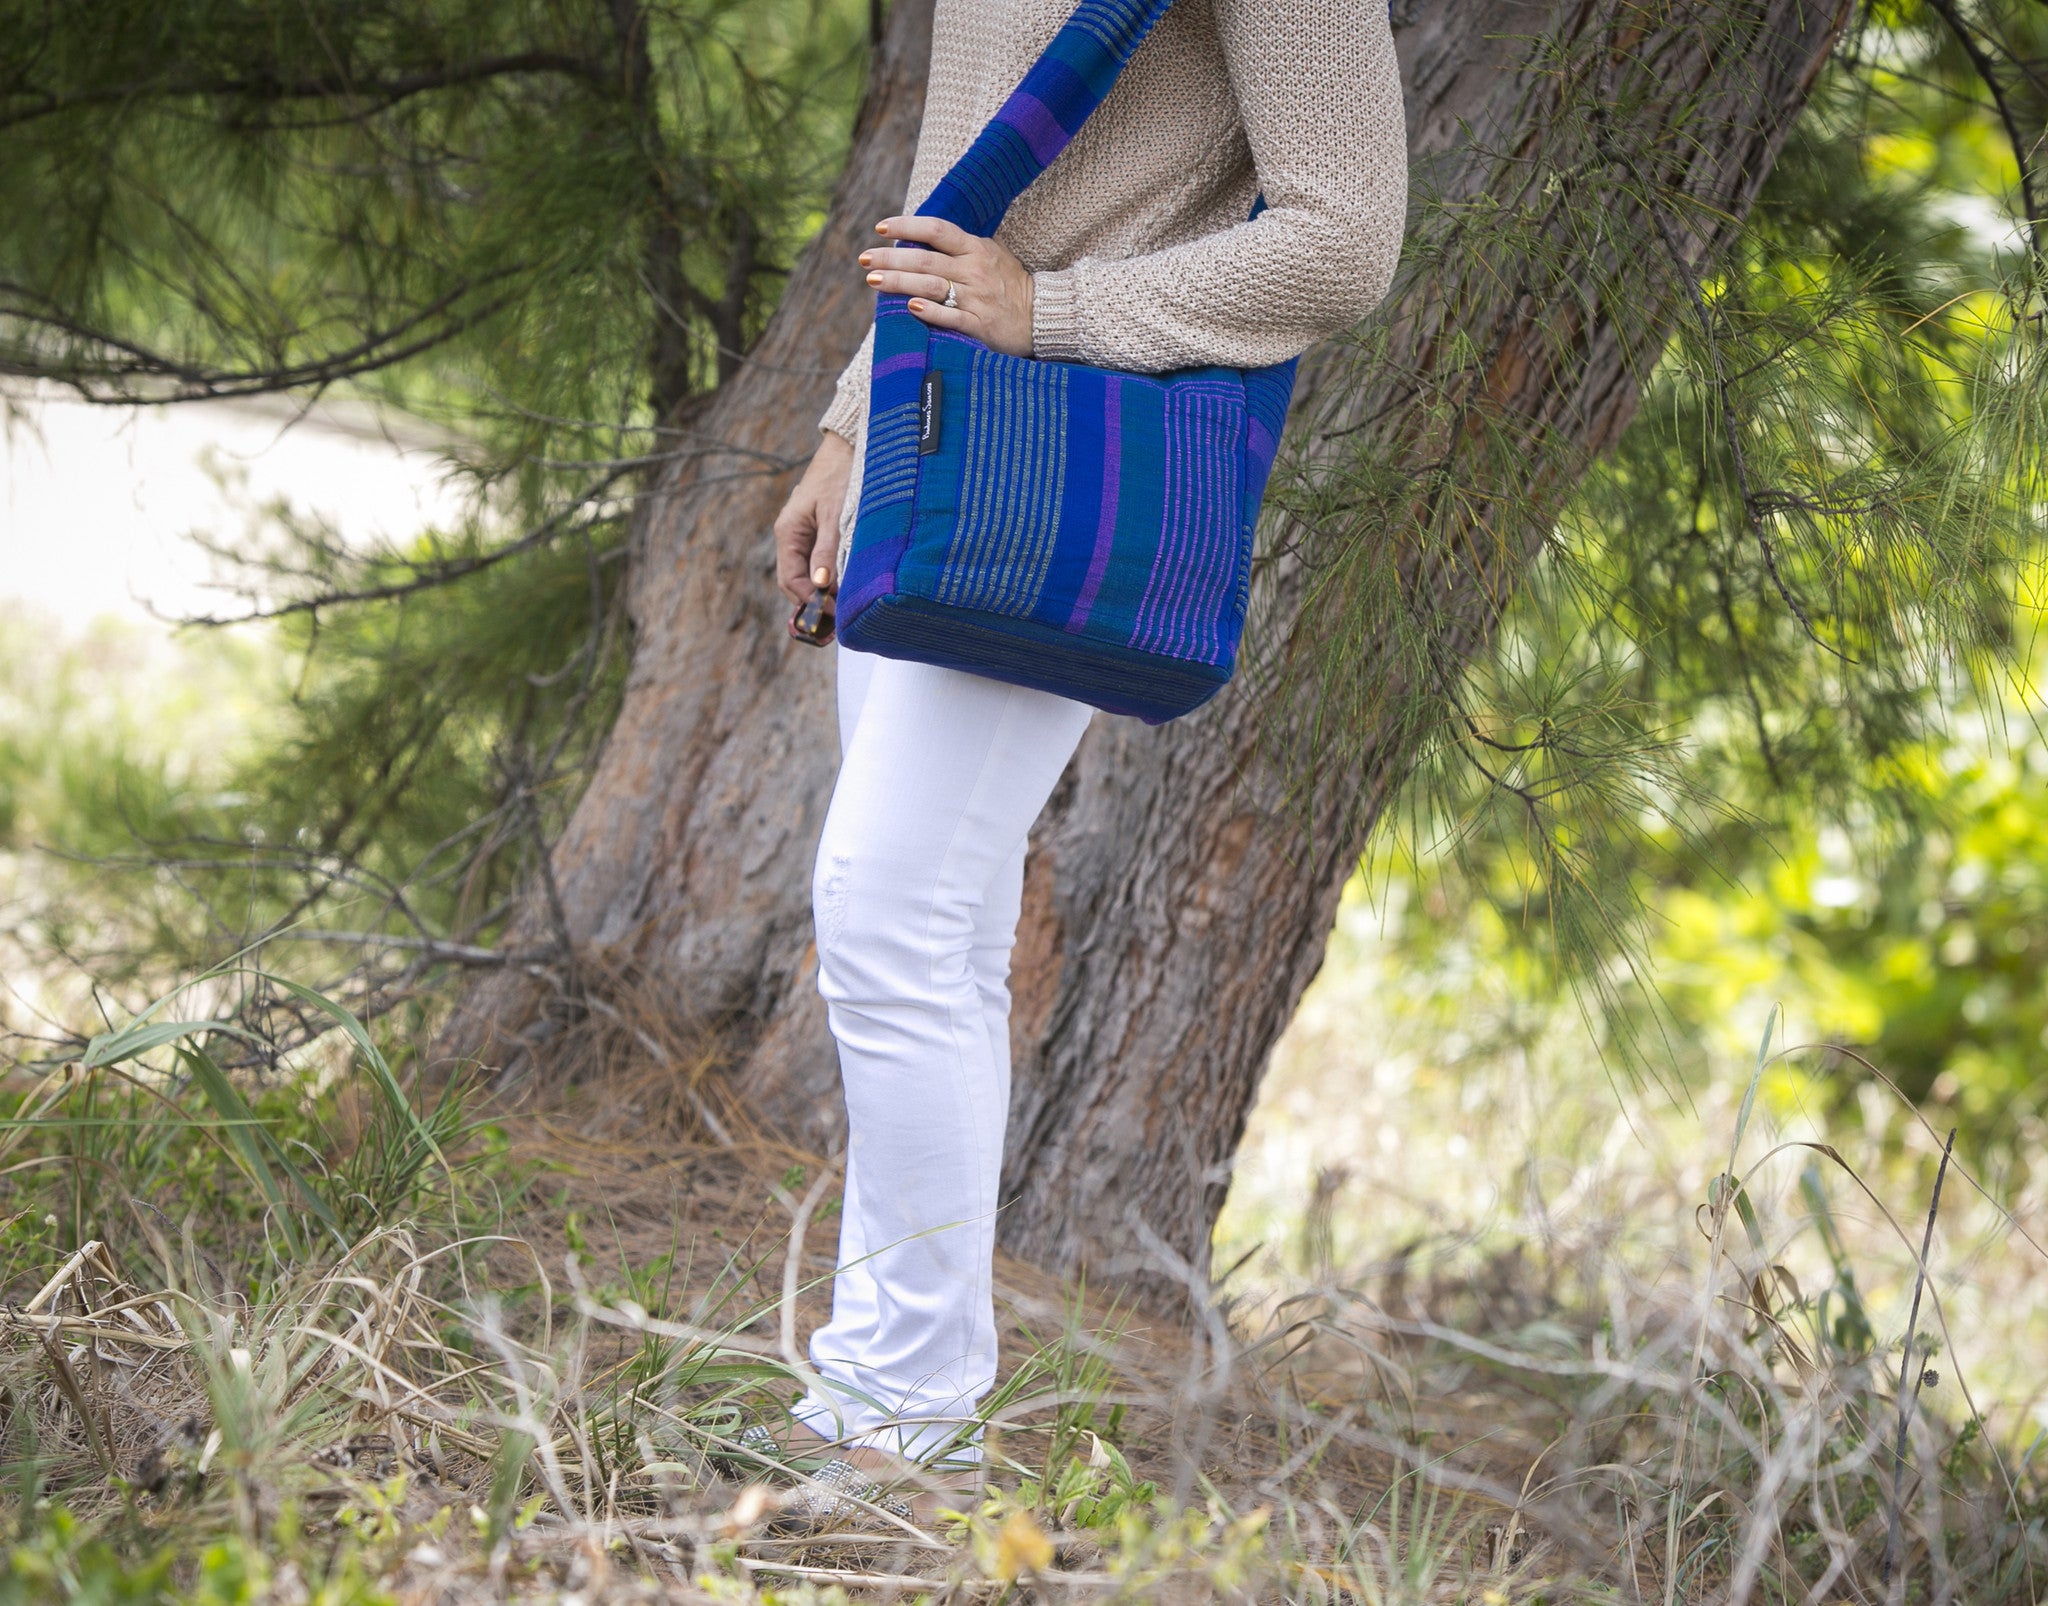 The Versatile Shoulder Bag - Great to carry as a handbag! (Dreamcatcher fabric shown in medium size)